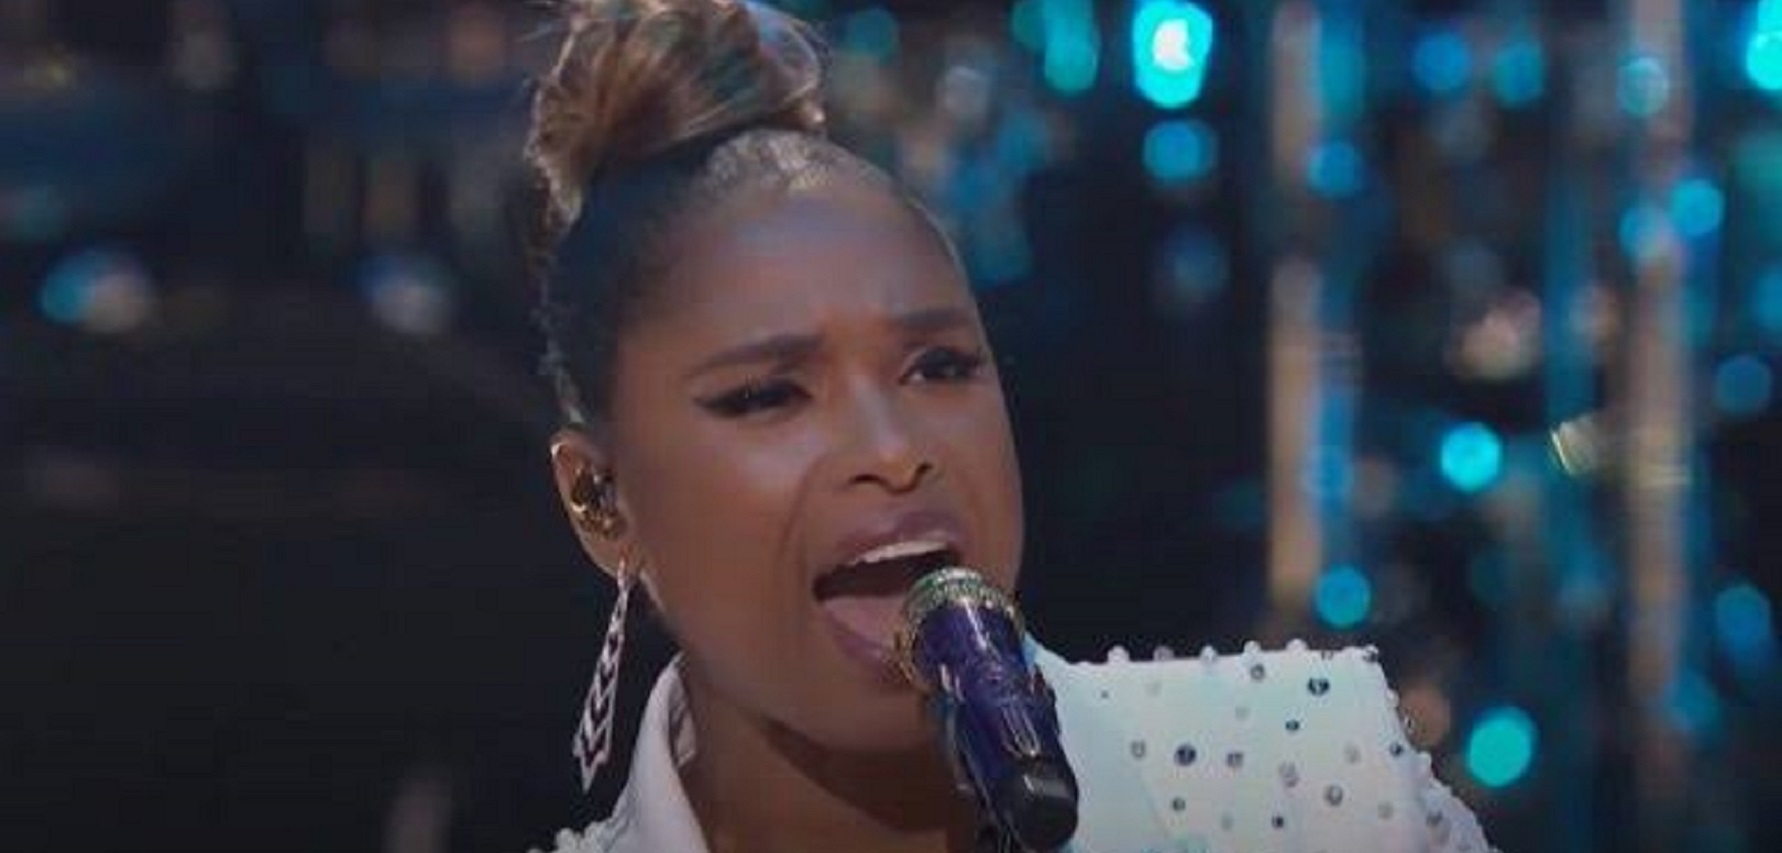 Watch: Jennifer Hudson Belts Out ‘Lean On Me’ For ‘Leading Through Change’